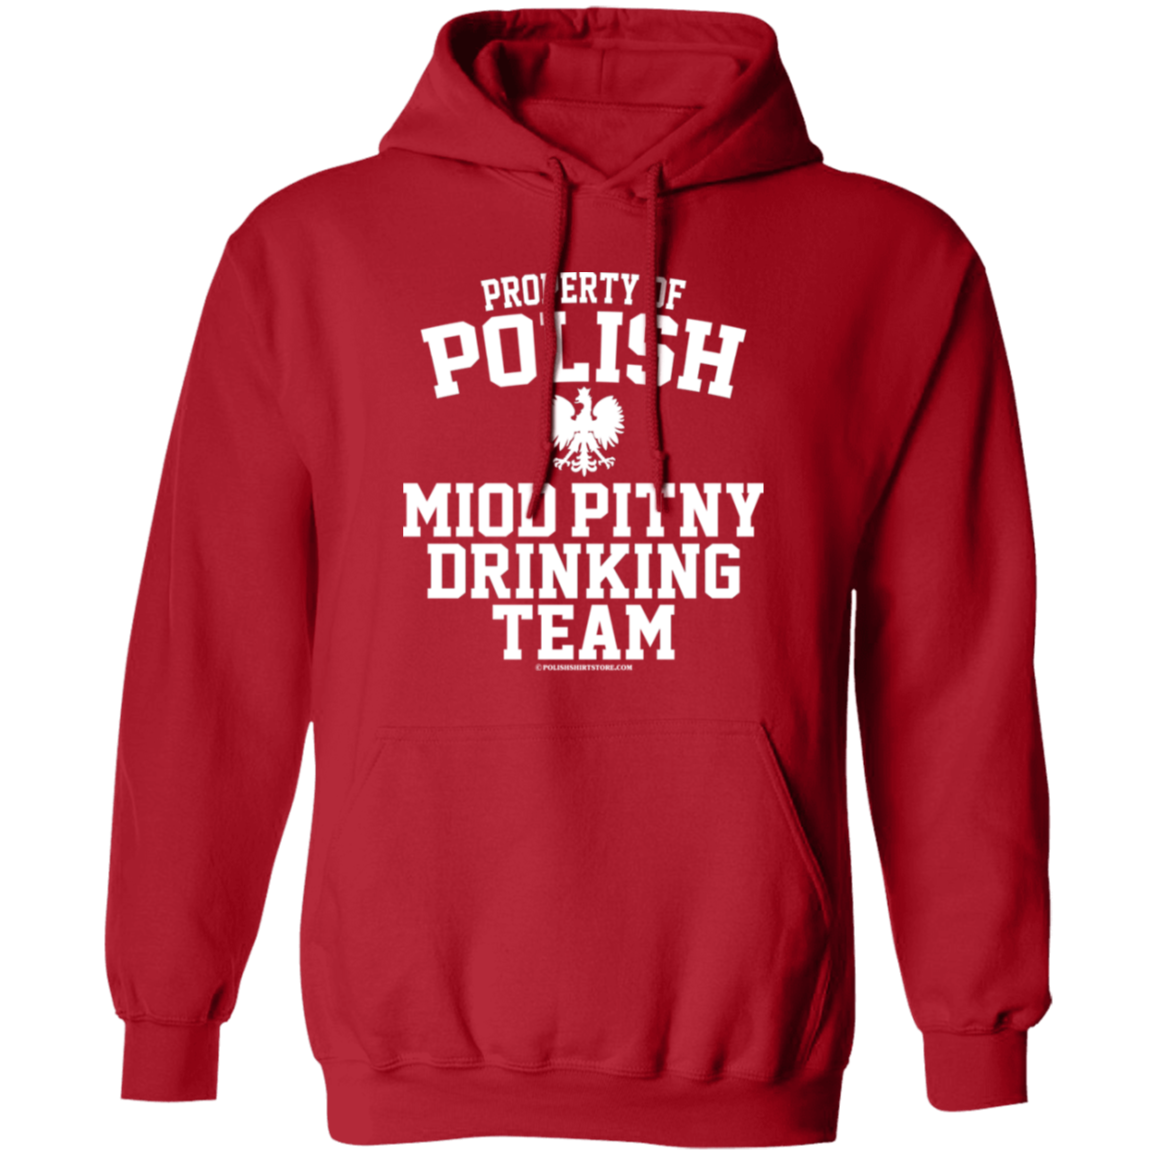 Property of Polish Miod Pitny Drinking Team Apparel CustomCat G185 Pullover Hoodie Red S